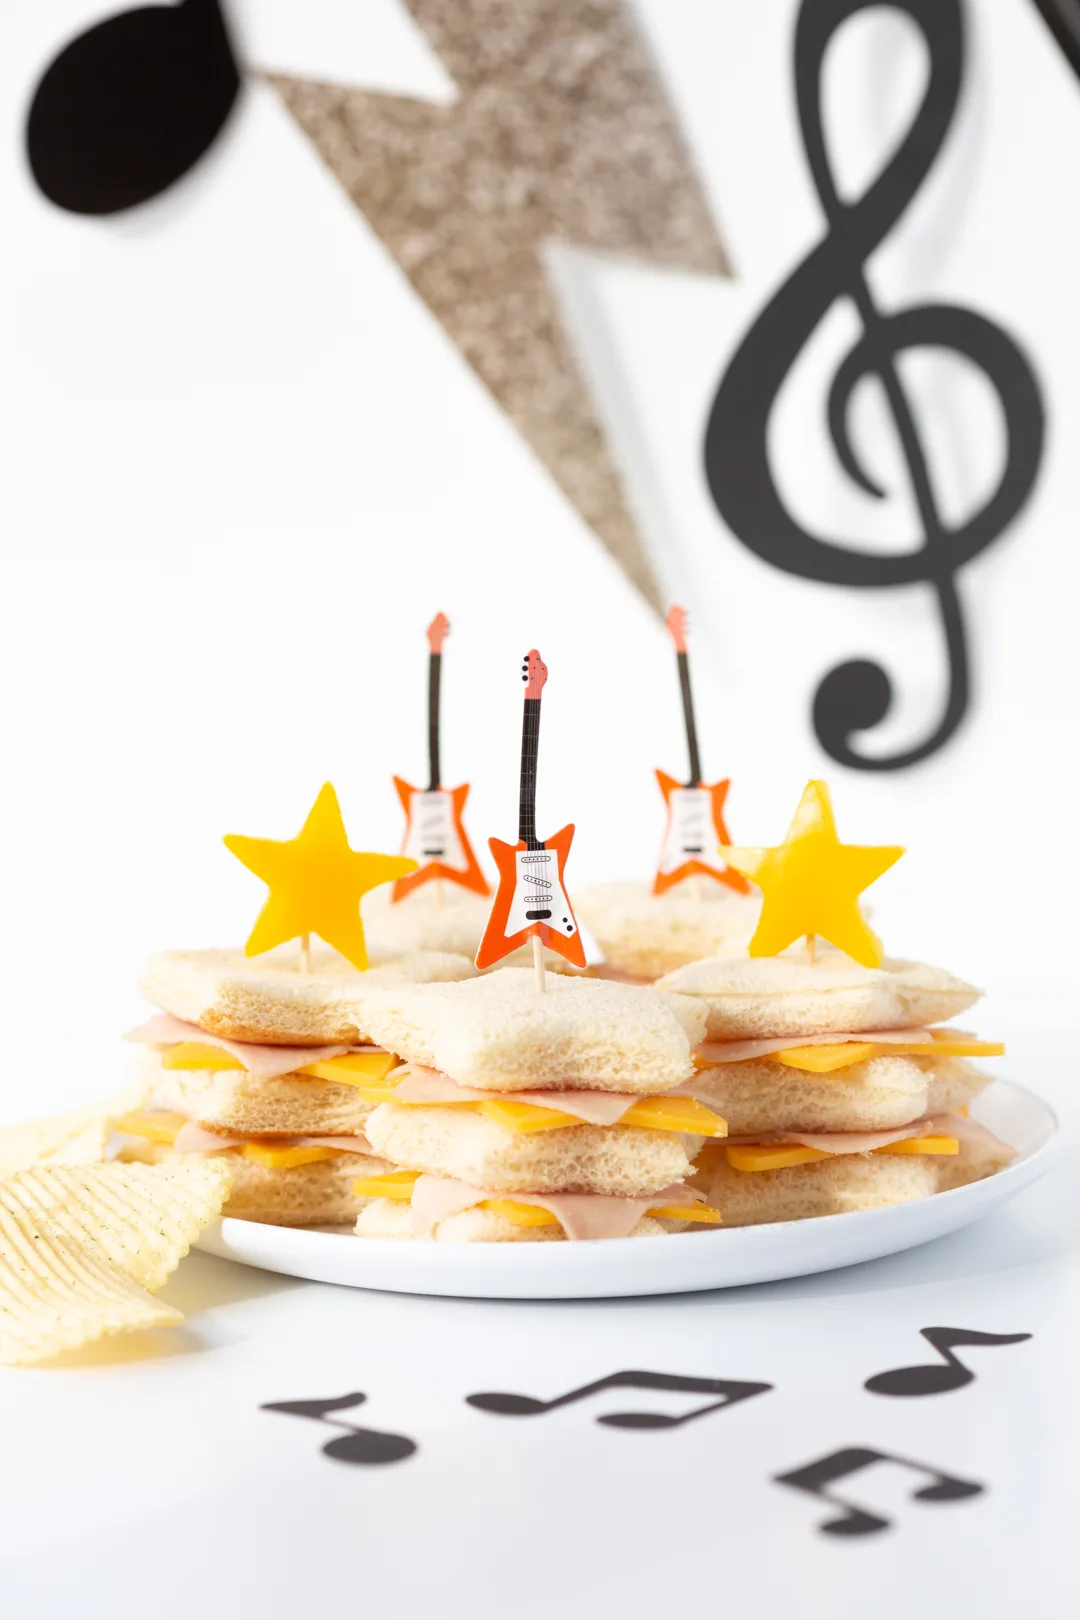 star shaped sandwiches for music rockstar parties and rock dog 3 movie celebrations